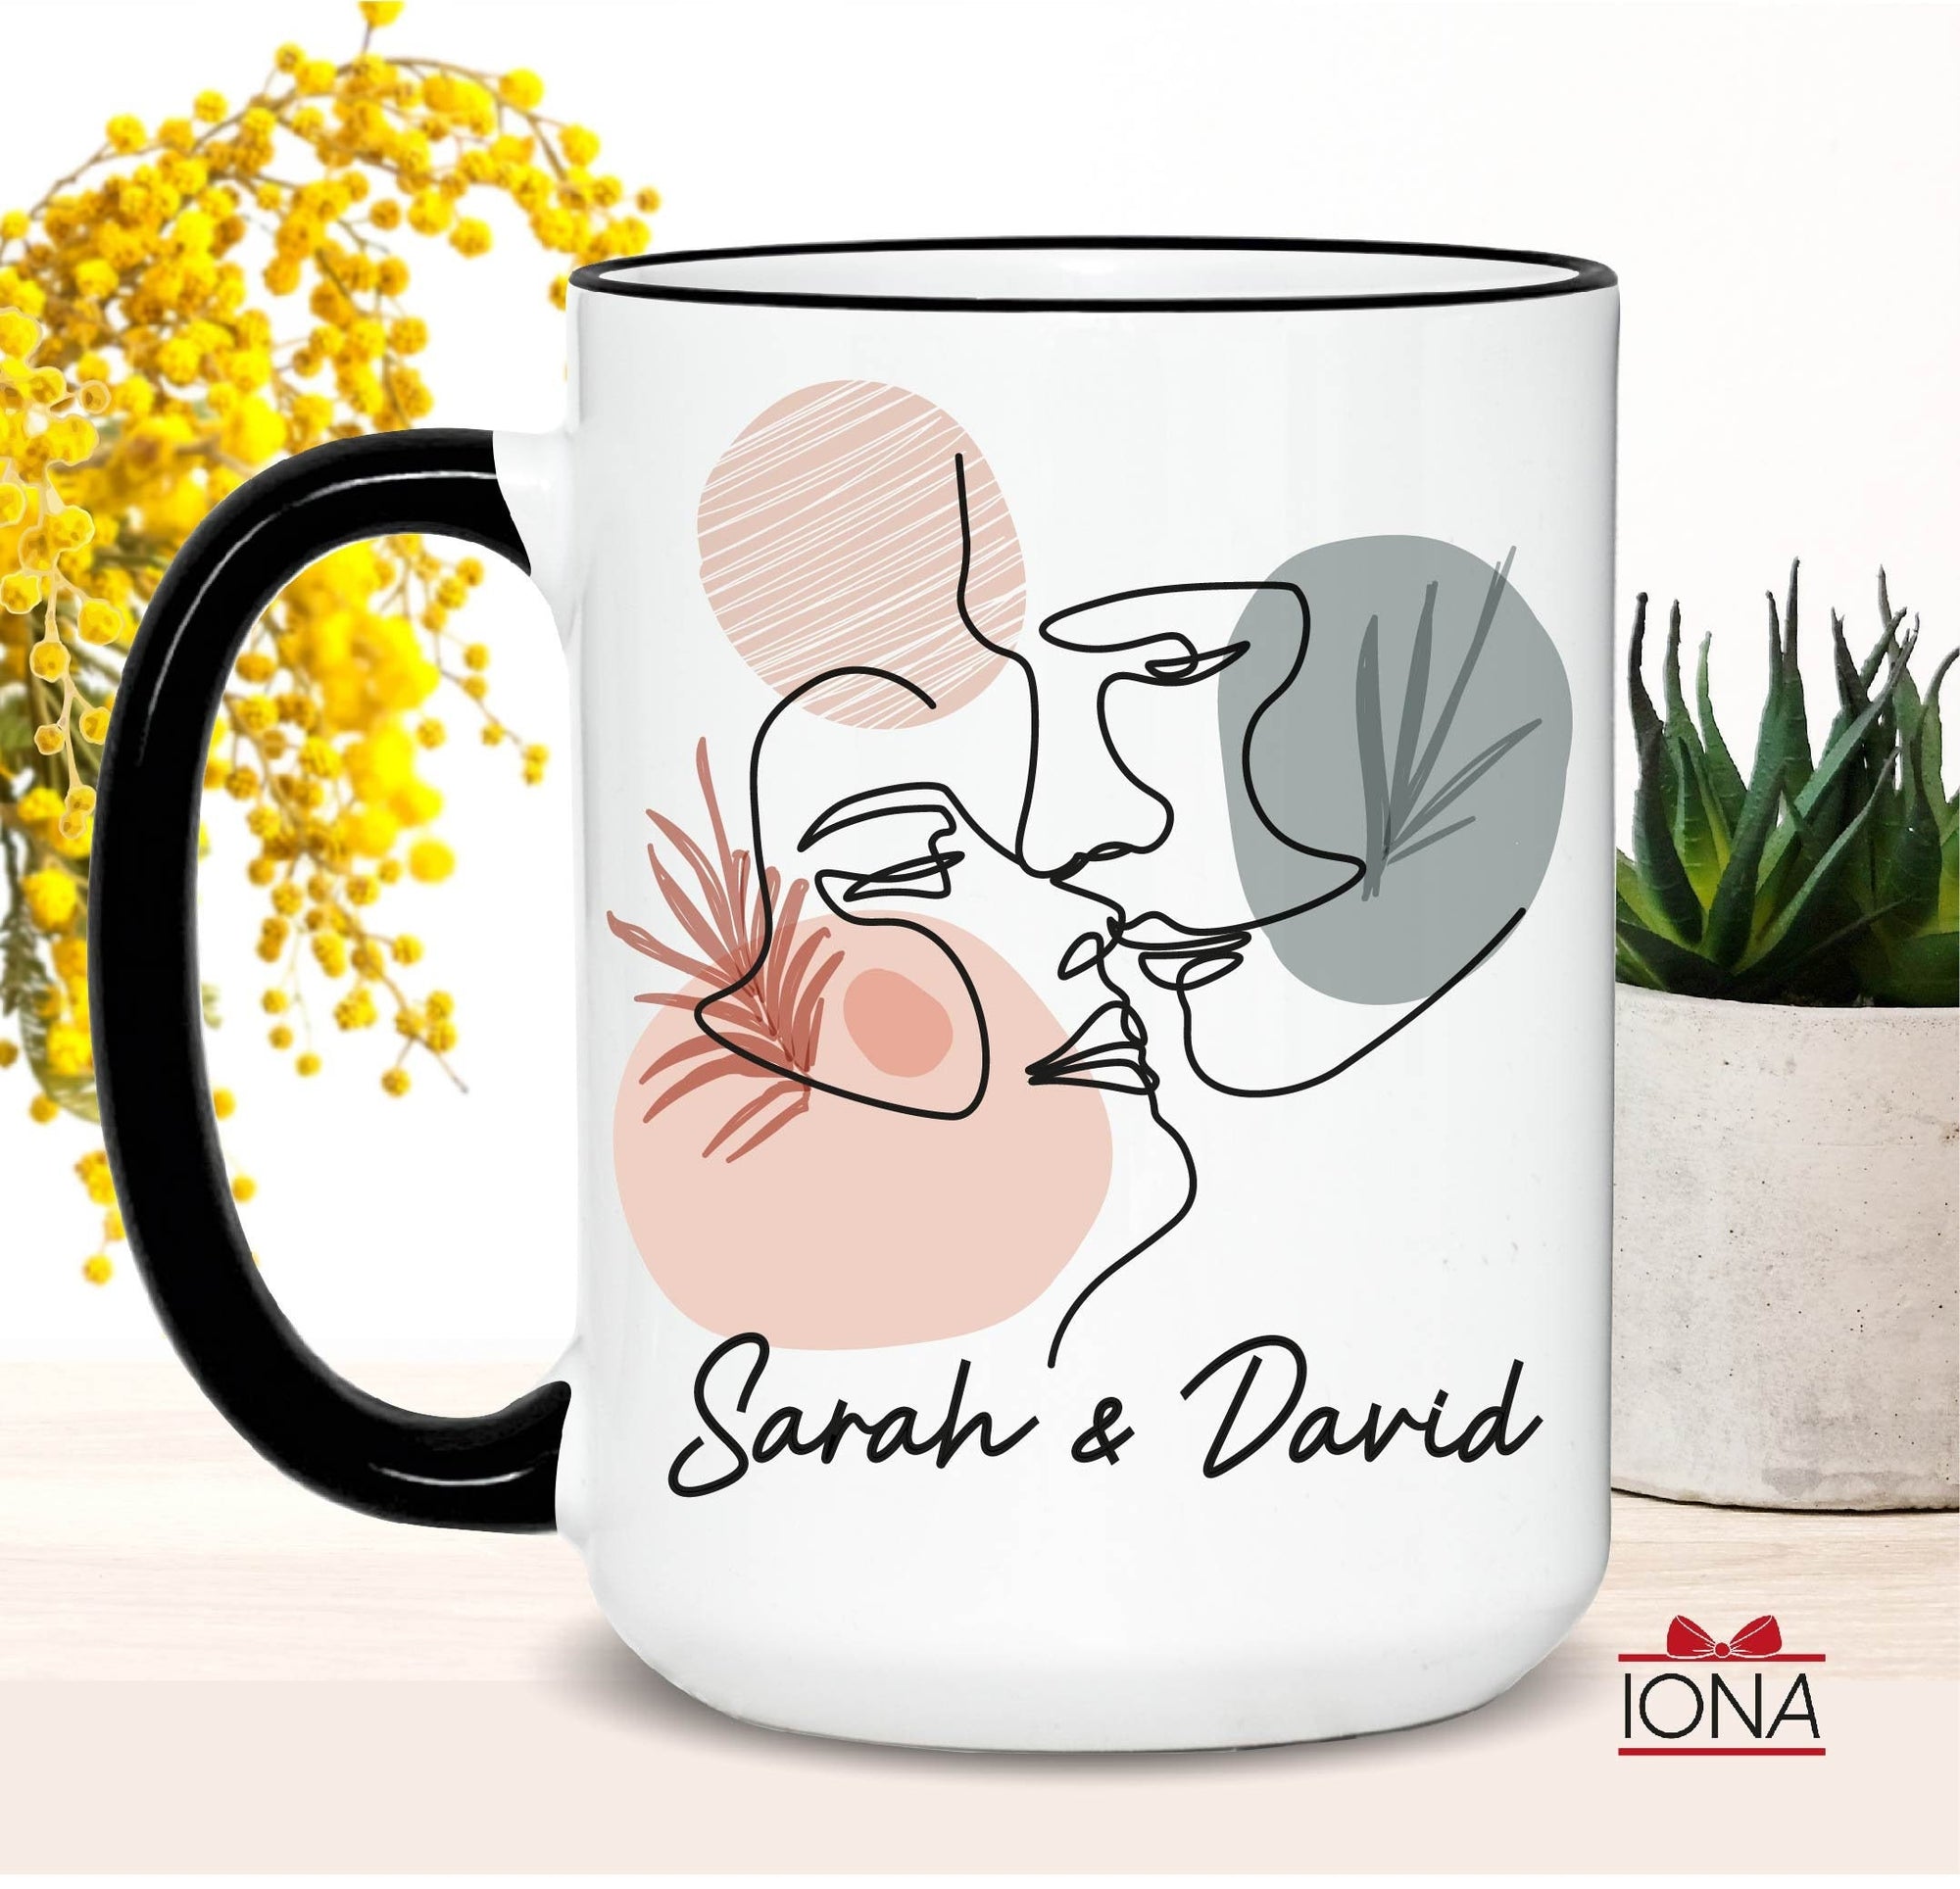 Valentines Day Couple Coffee Mug, Couples Gift, Girlfriend Gifts, Romantic Gifts for Her, Line Art Mug, Custom Couple gift, Gift for him